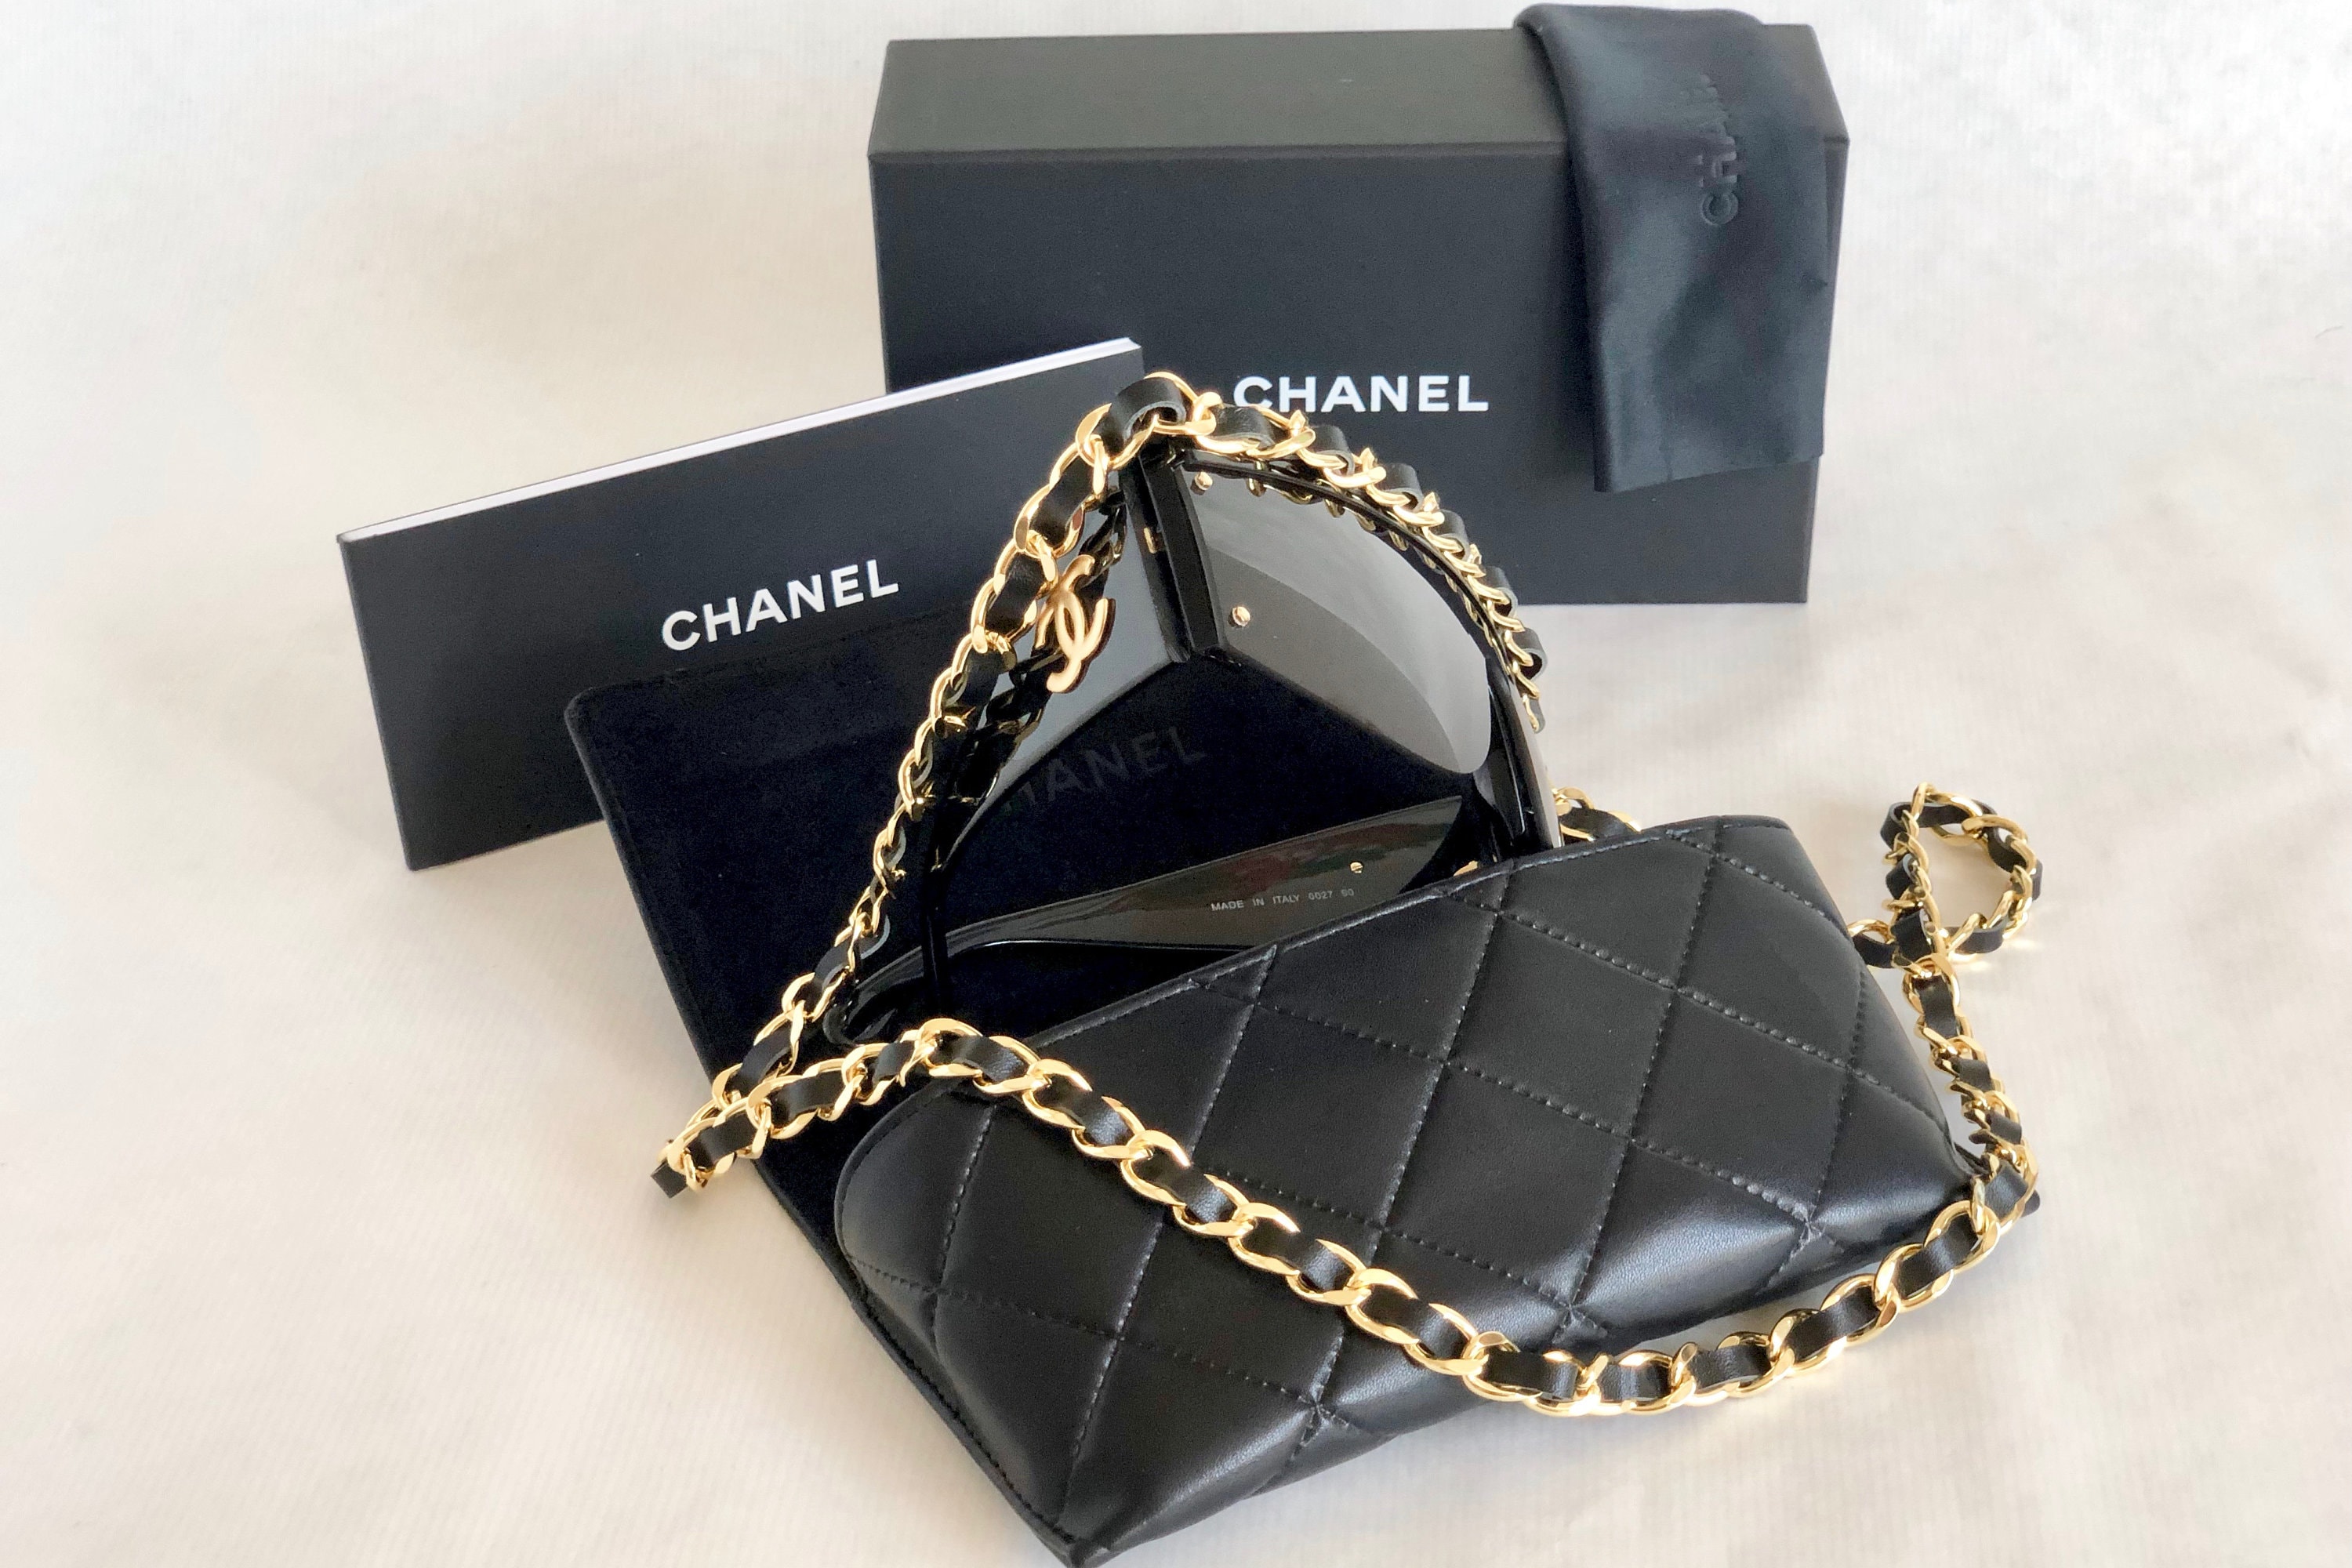 CHANEL 0027 Long Chain Vintage Sunglasses – New Old Stock – Full Set